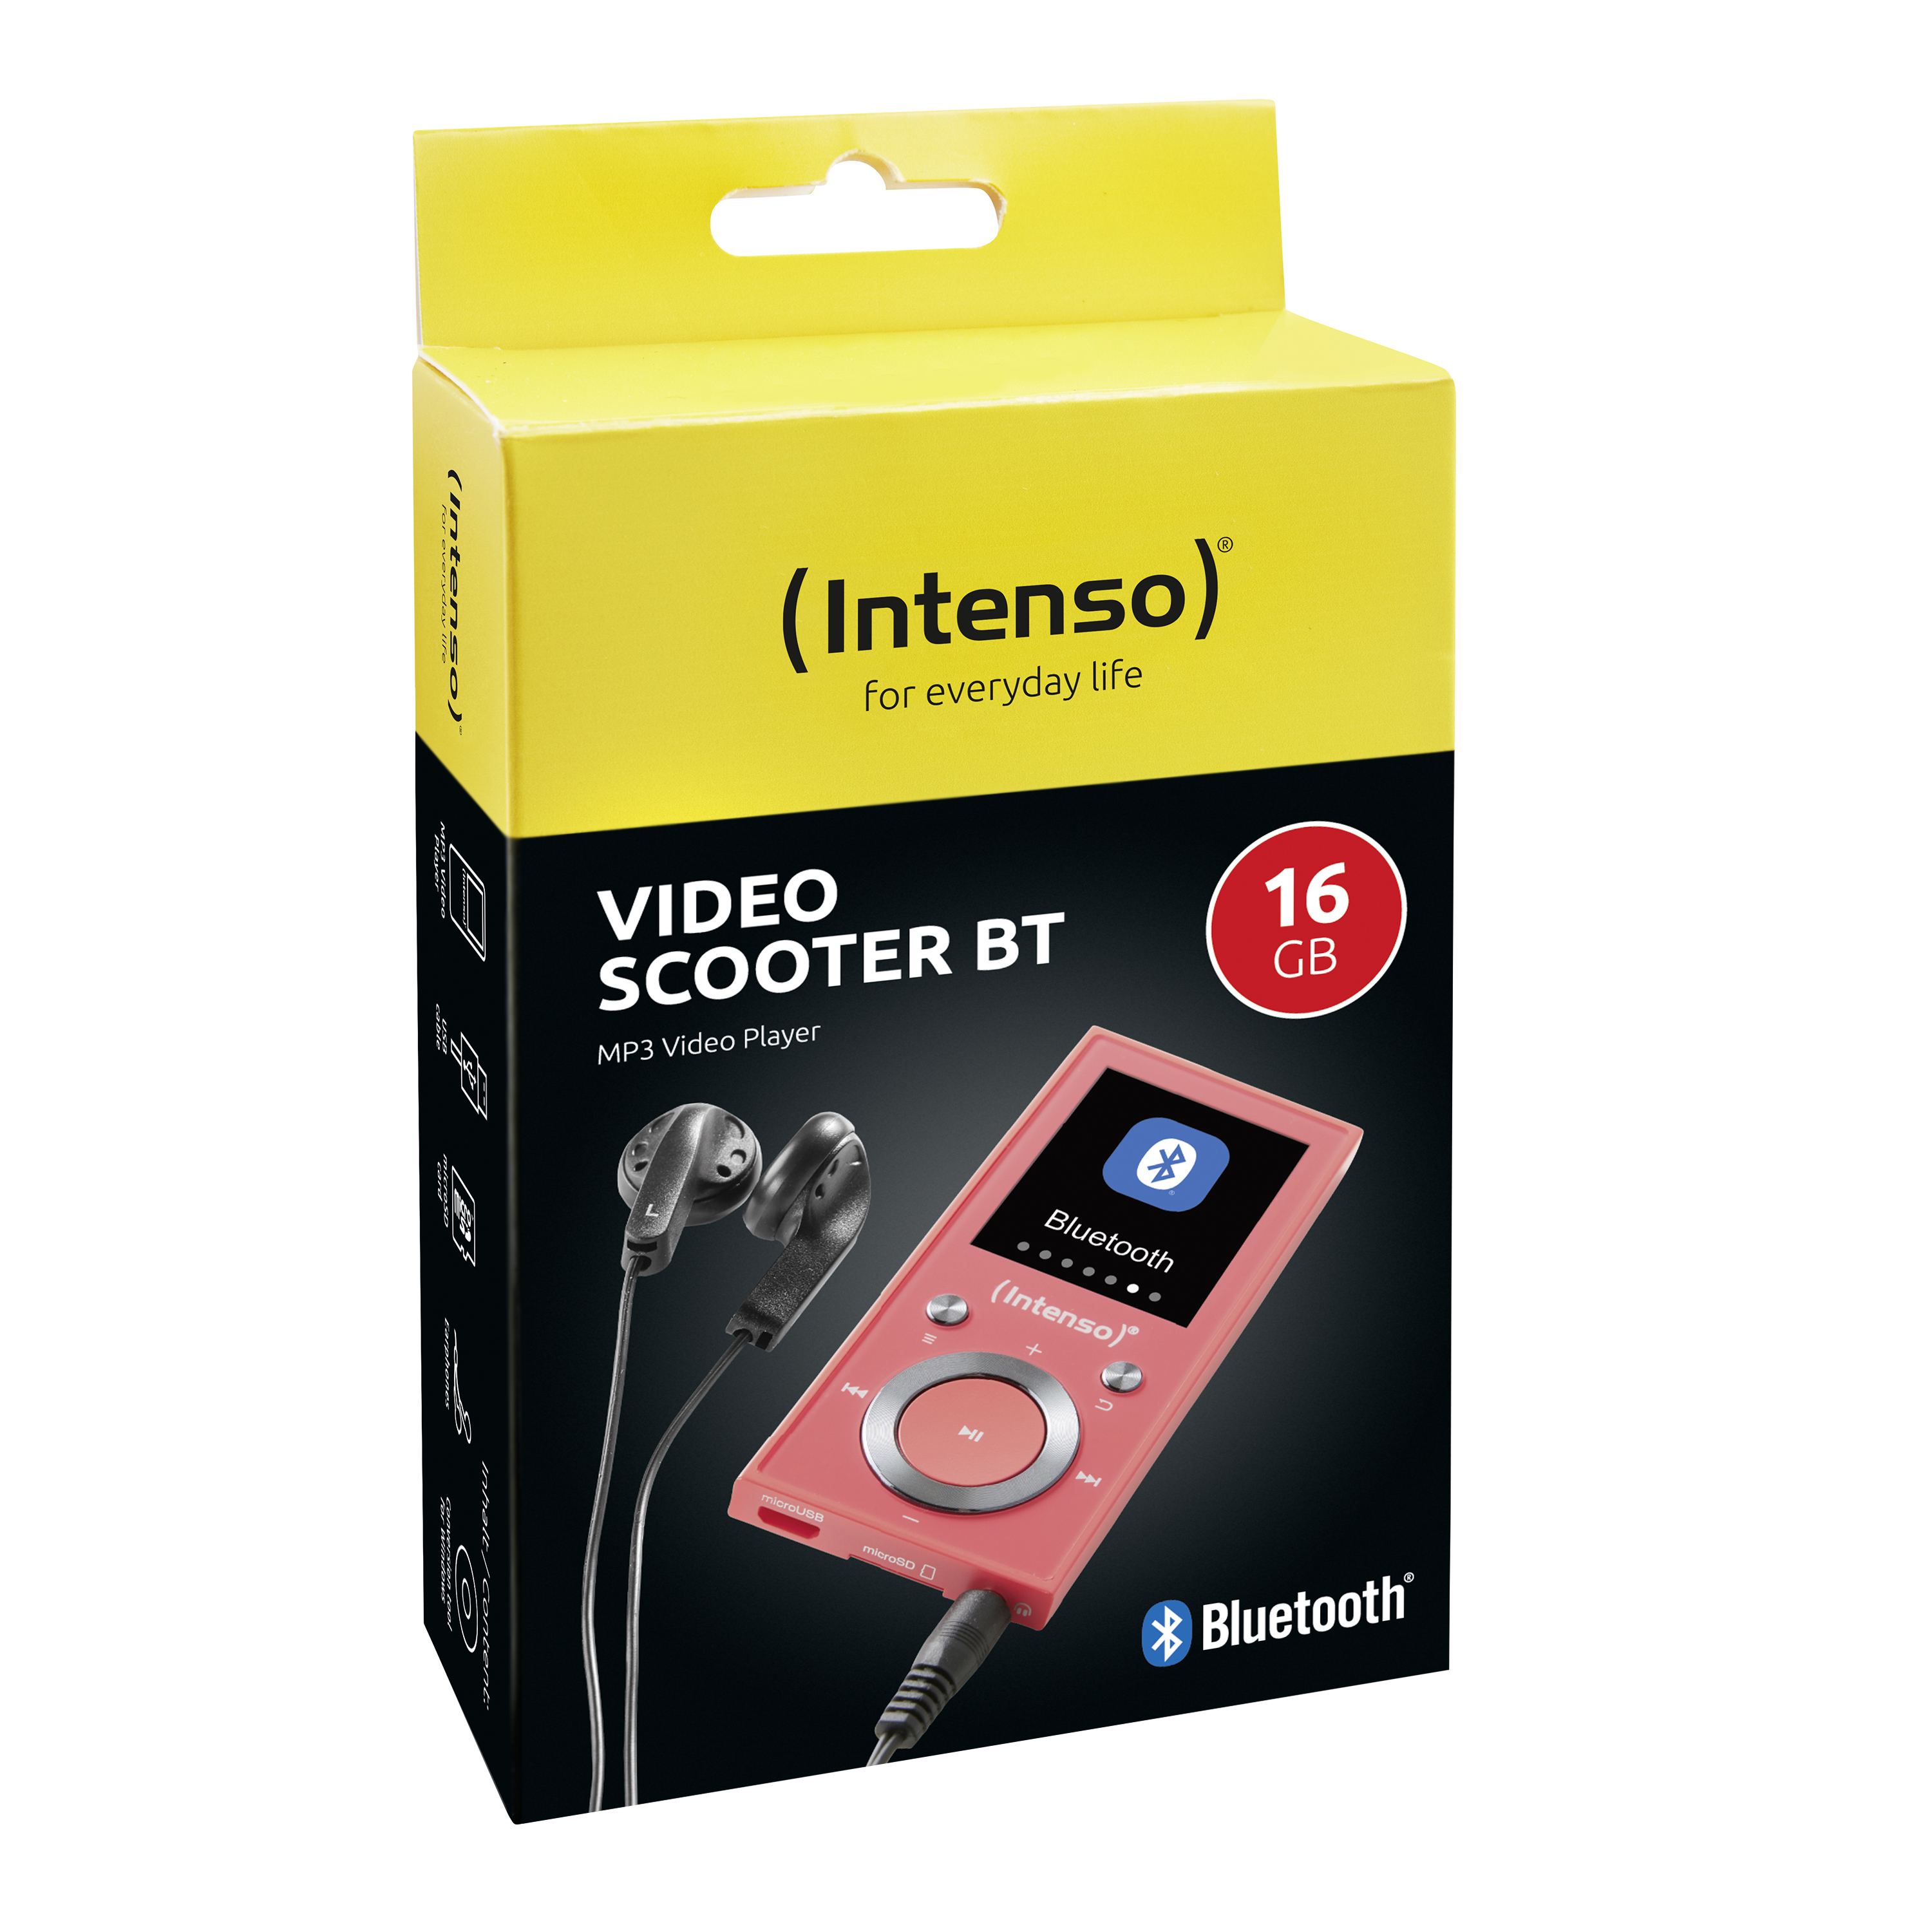 Videoplayer 16 Scooter Player Video MP4 Blau MP3 INTENSO GB, BT